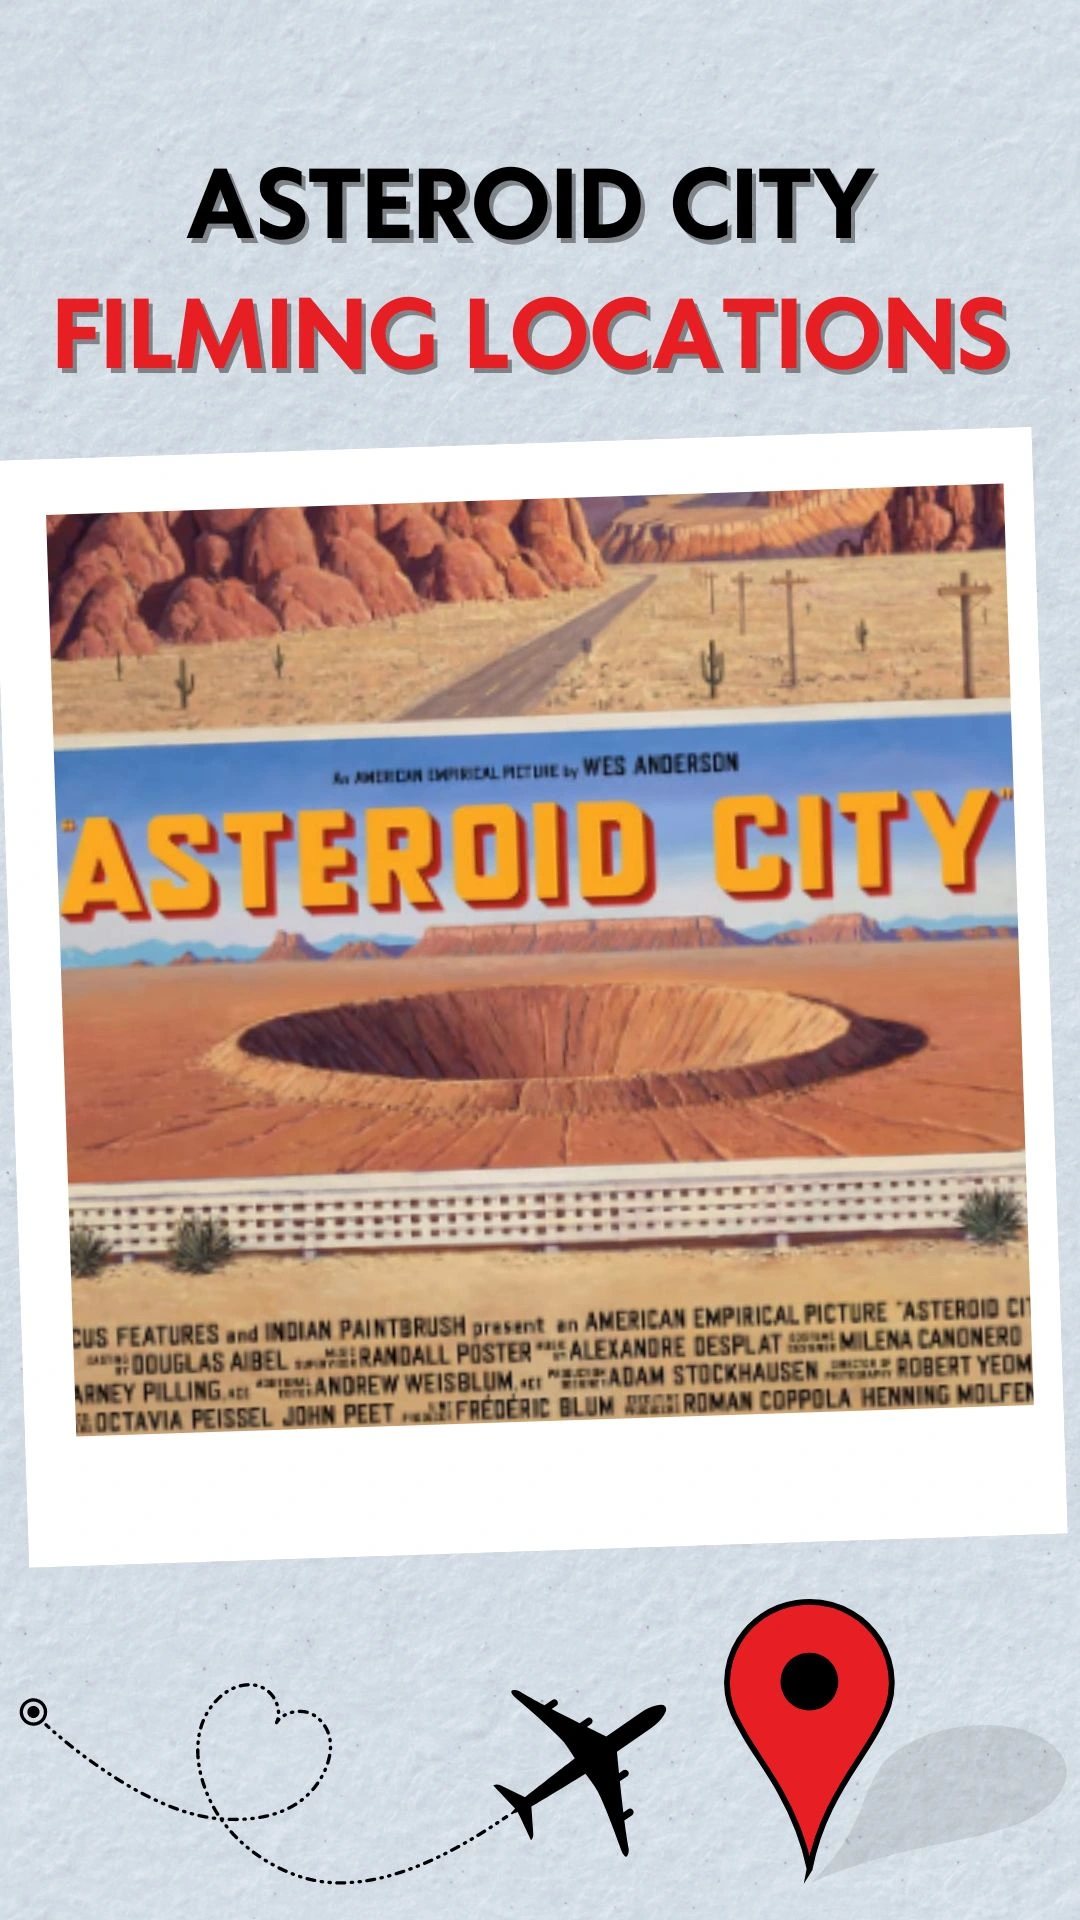 Asteroid City Filming Locations